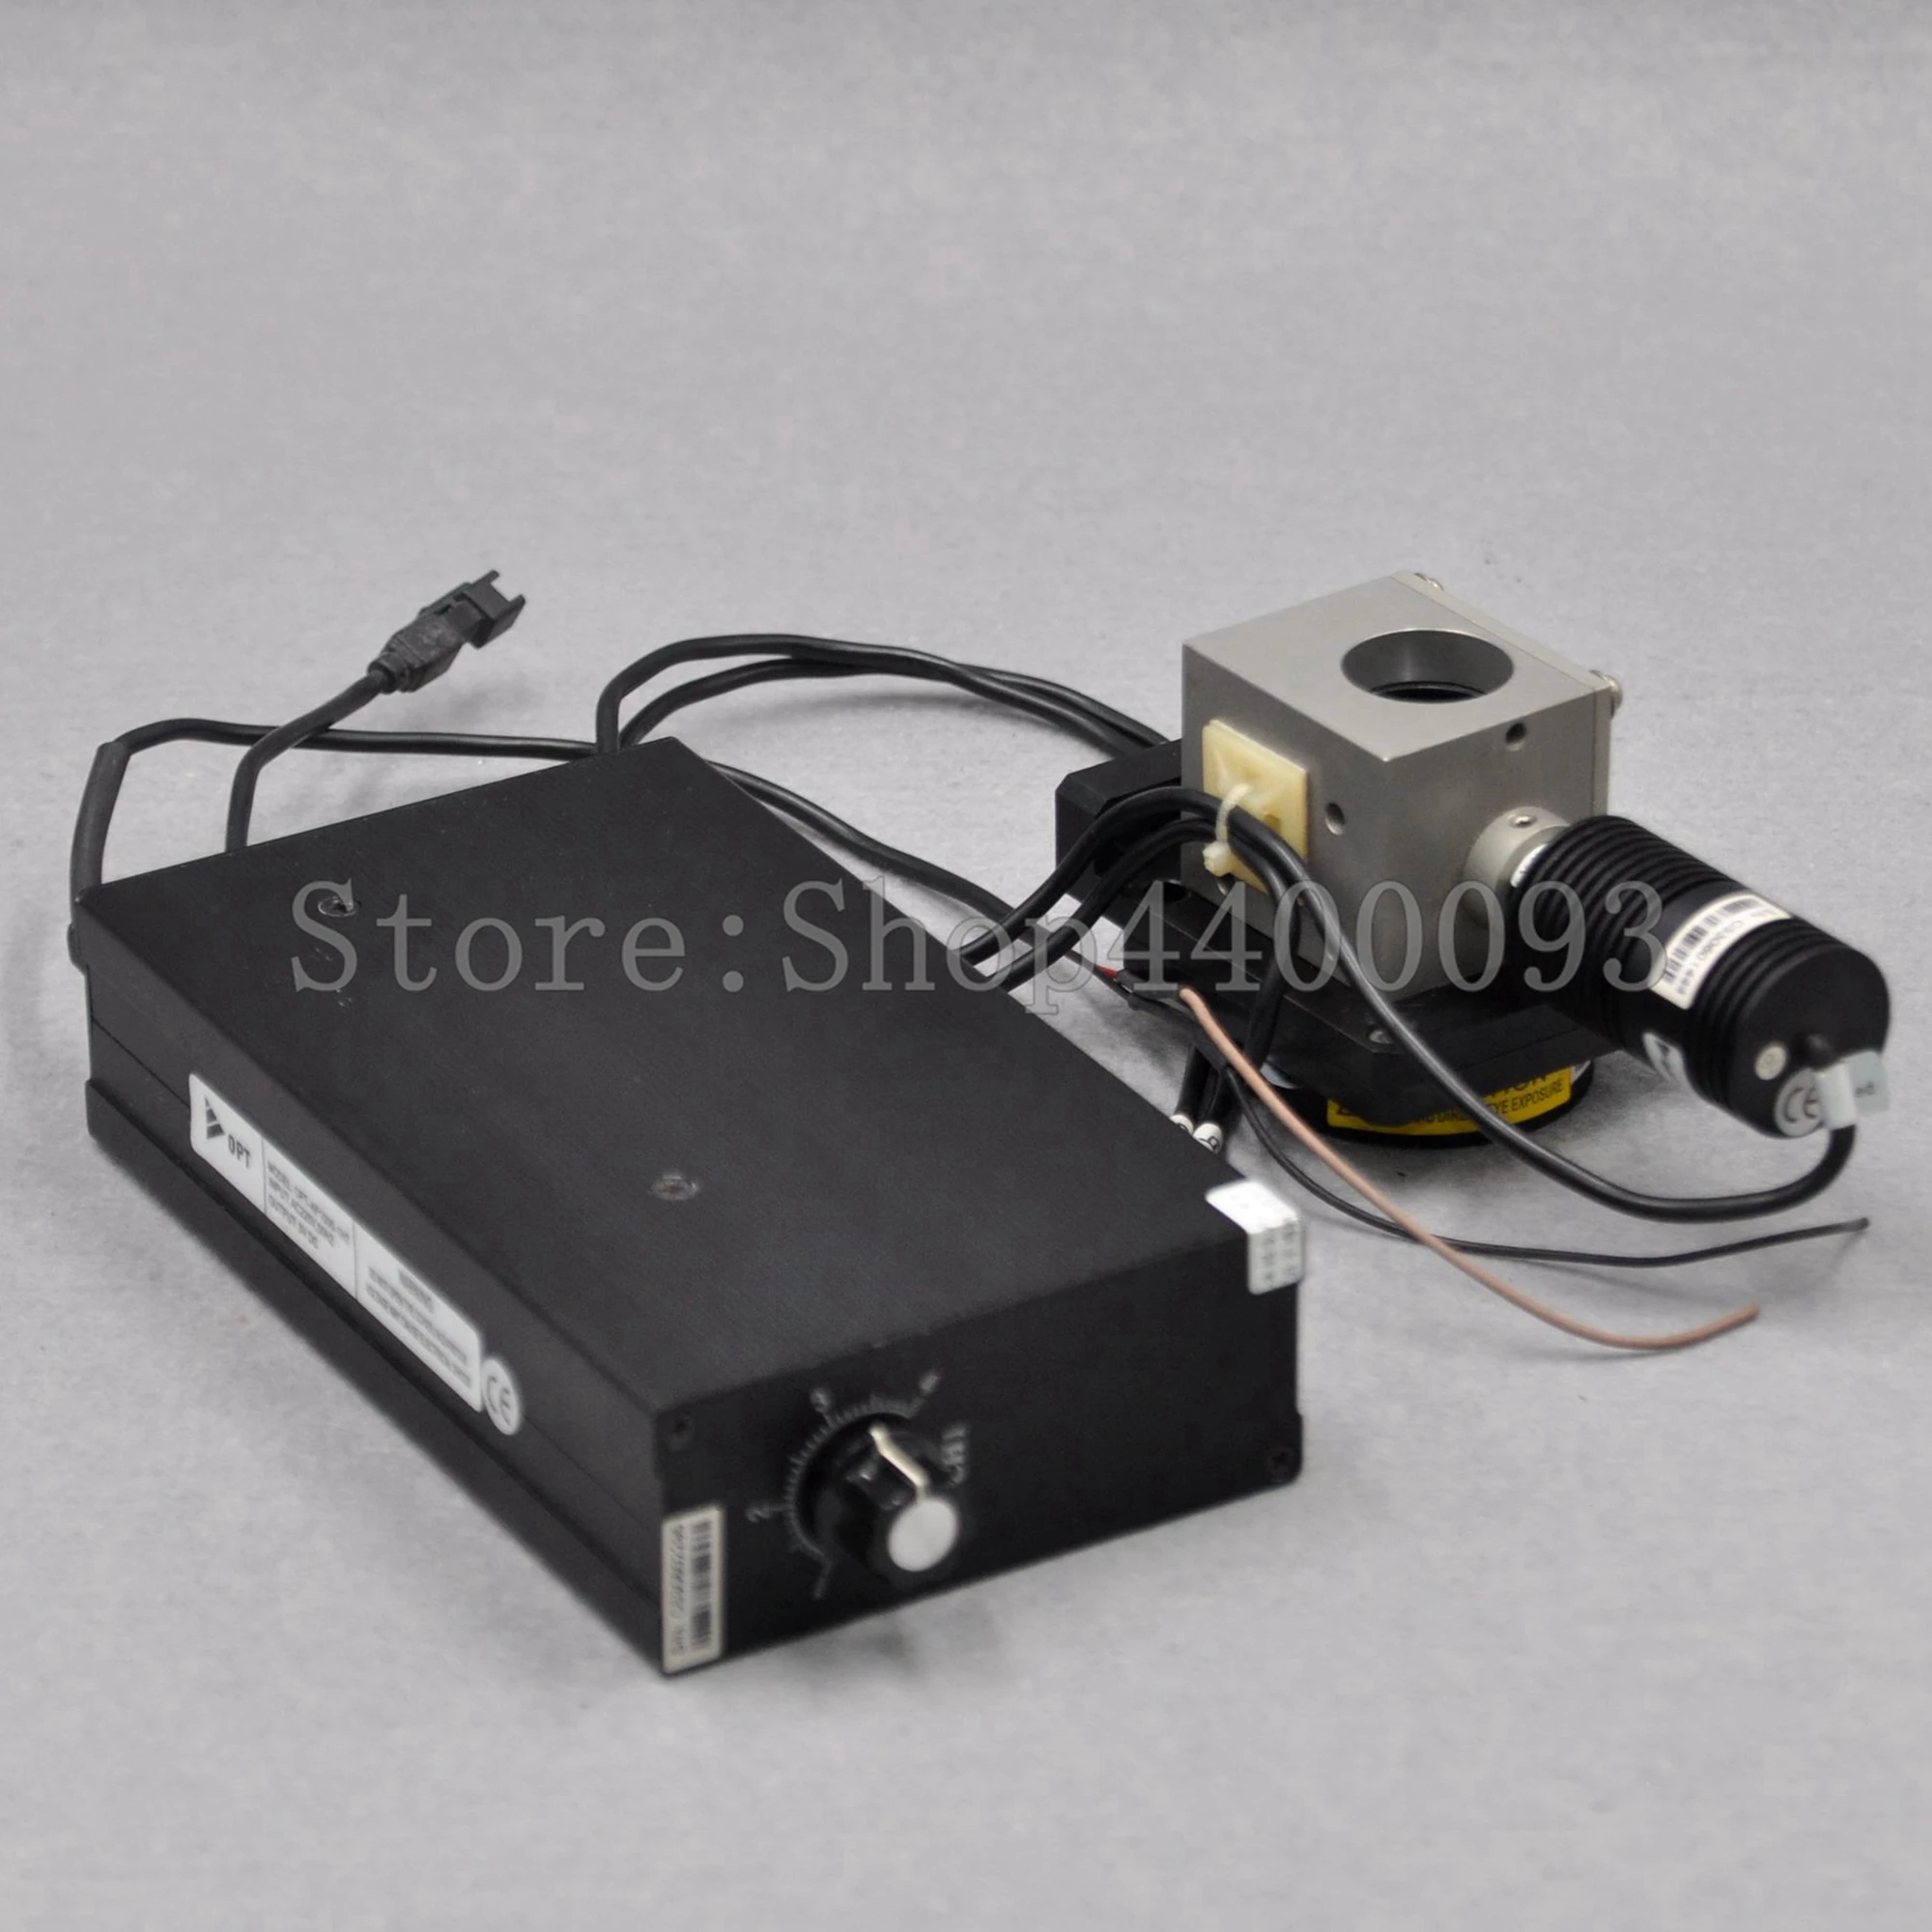 OPT OPT-AP1005-1HT AC220V 50HZ 5VDC Controller with industrial camera Pl0803CF 5VDC 3.0W